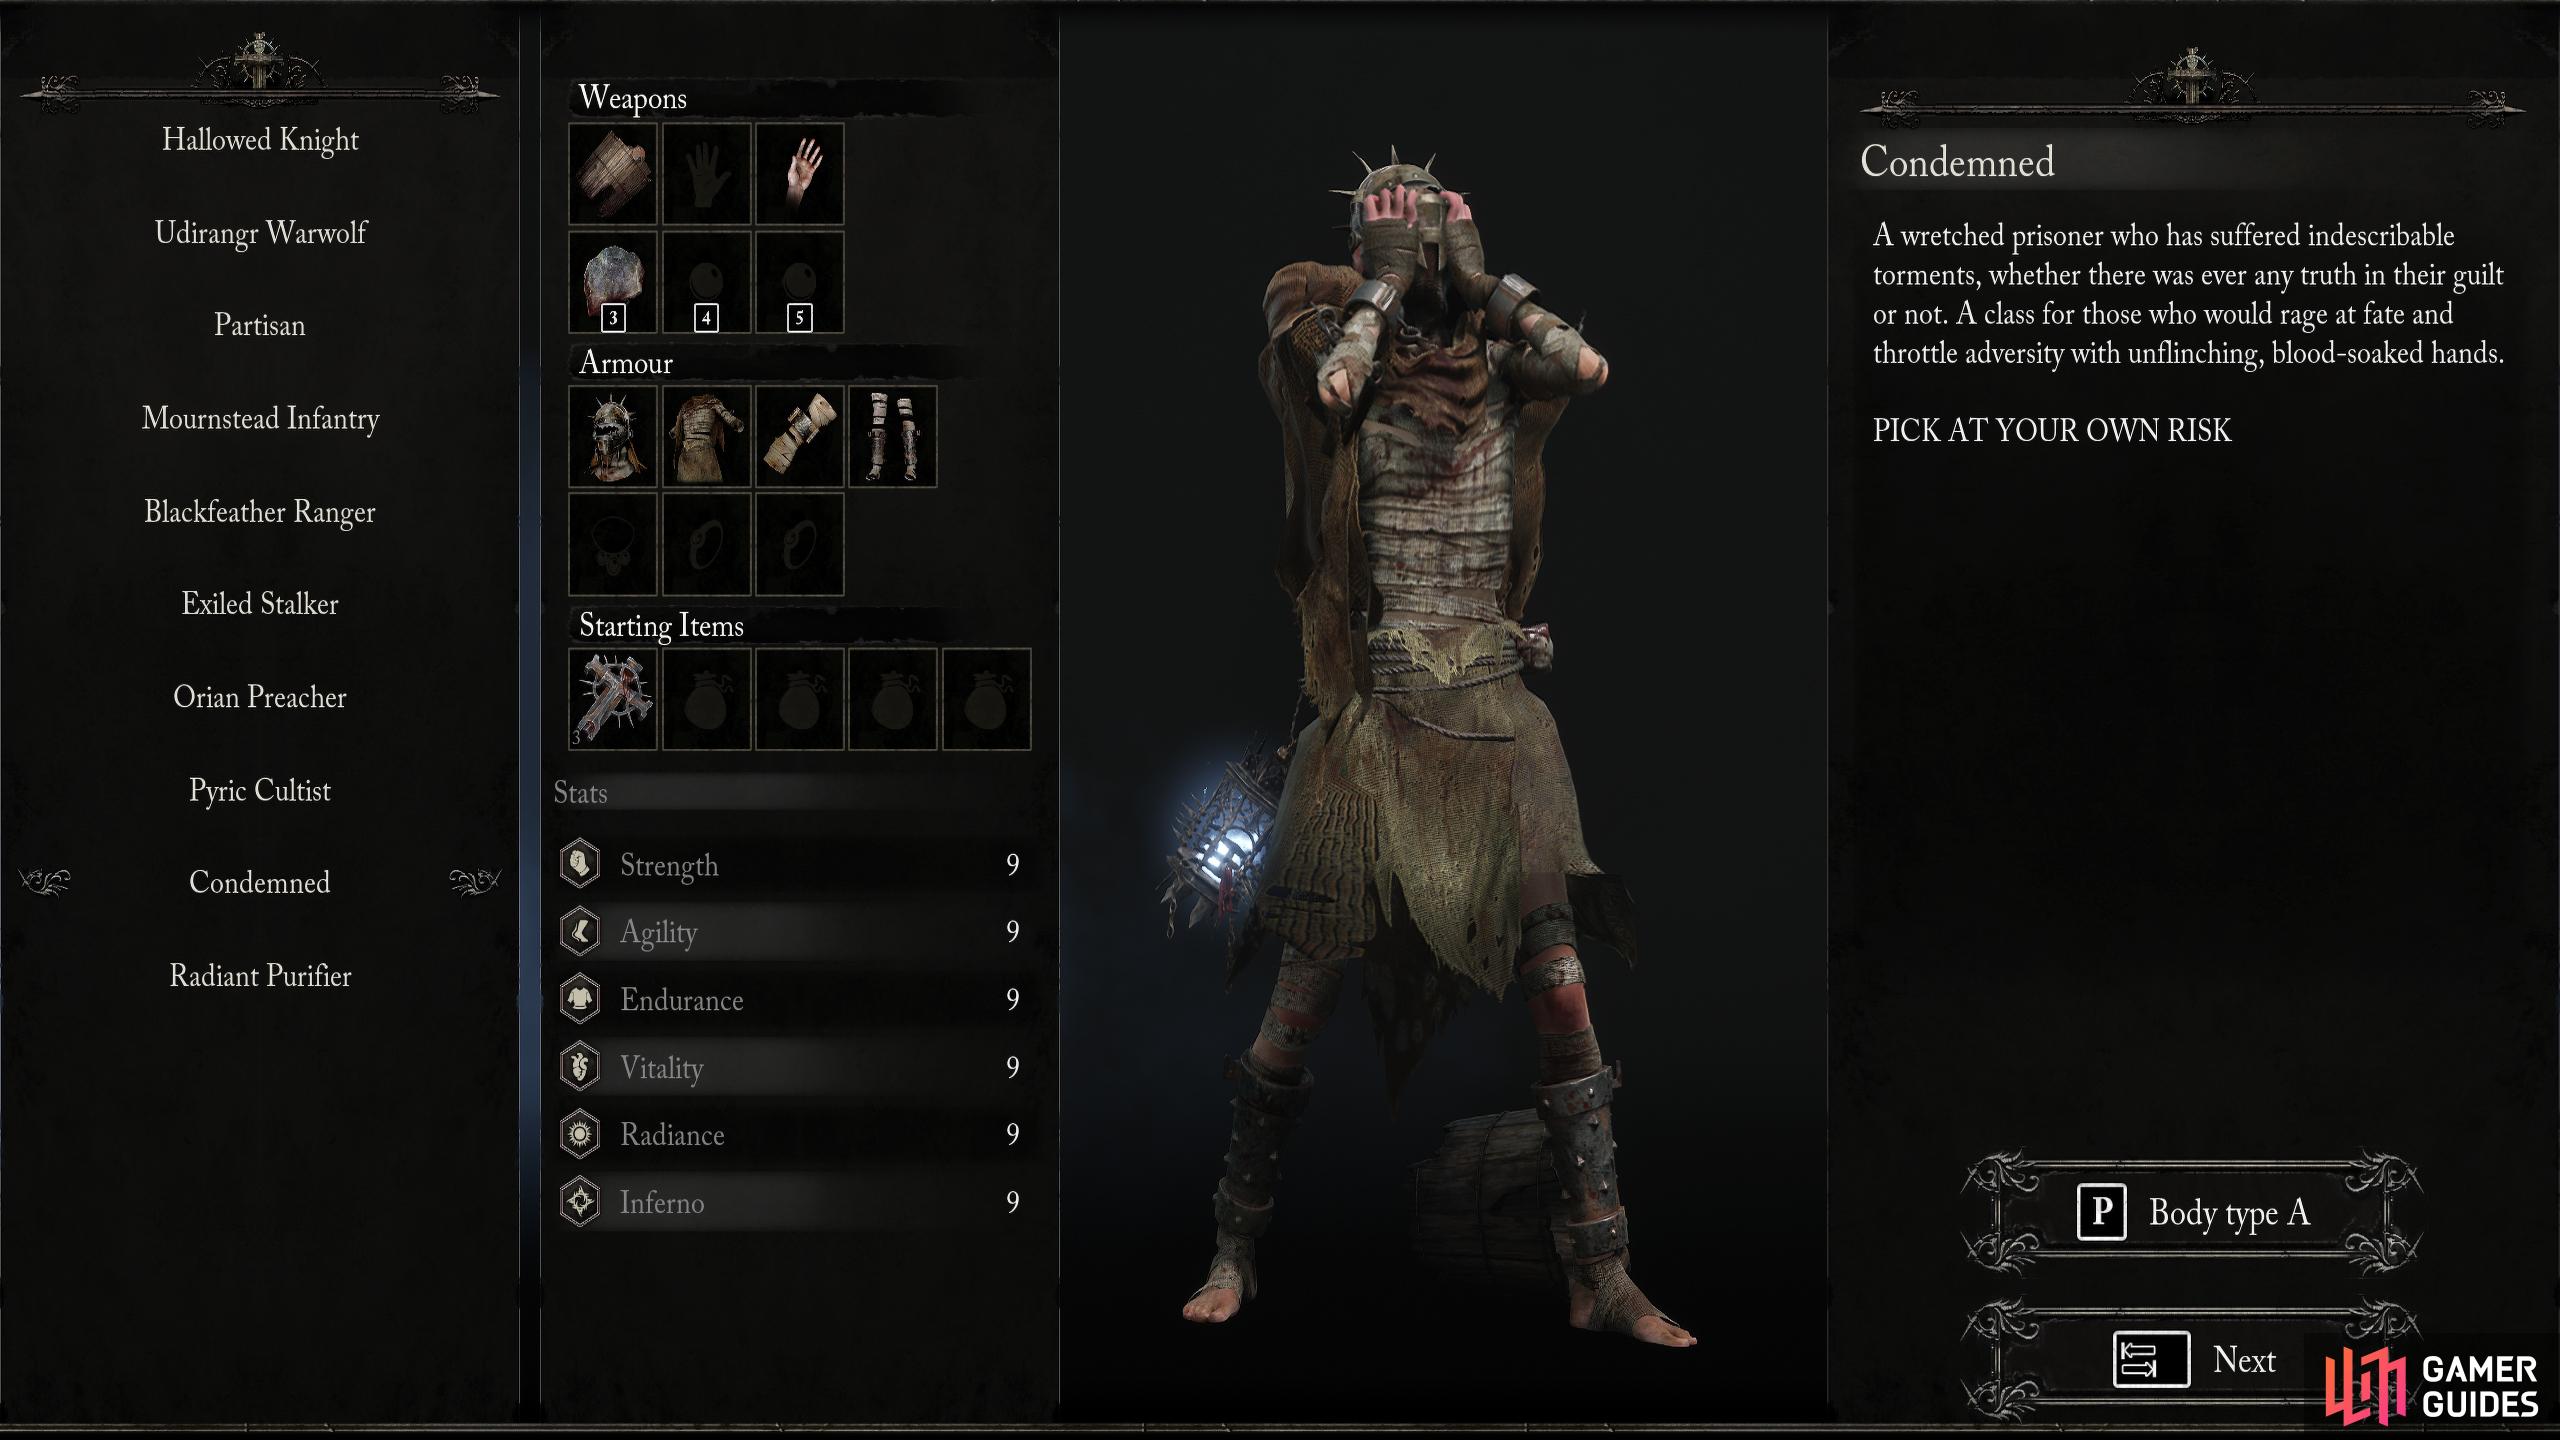 If you want to min/max the build, you’ll want to pick the Condemned class.